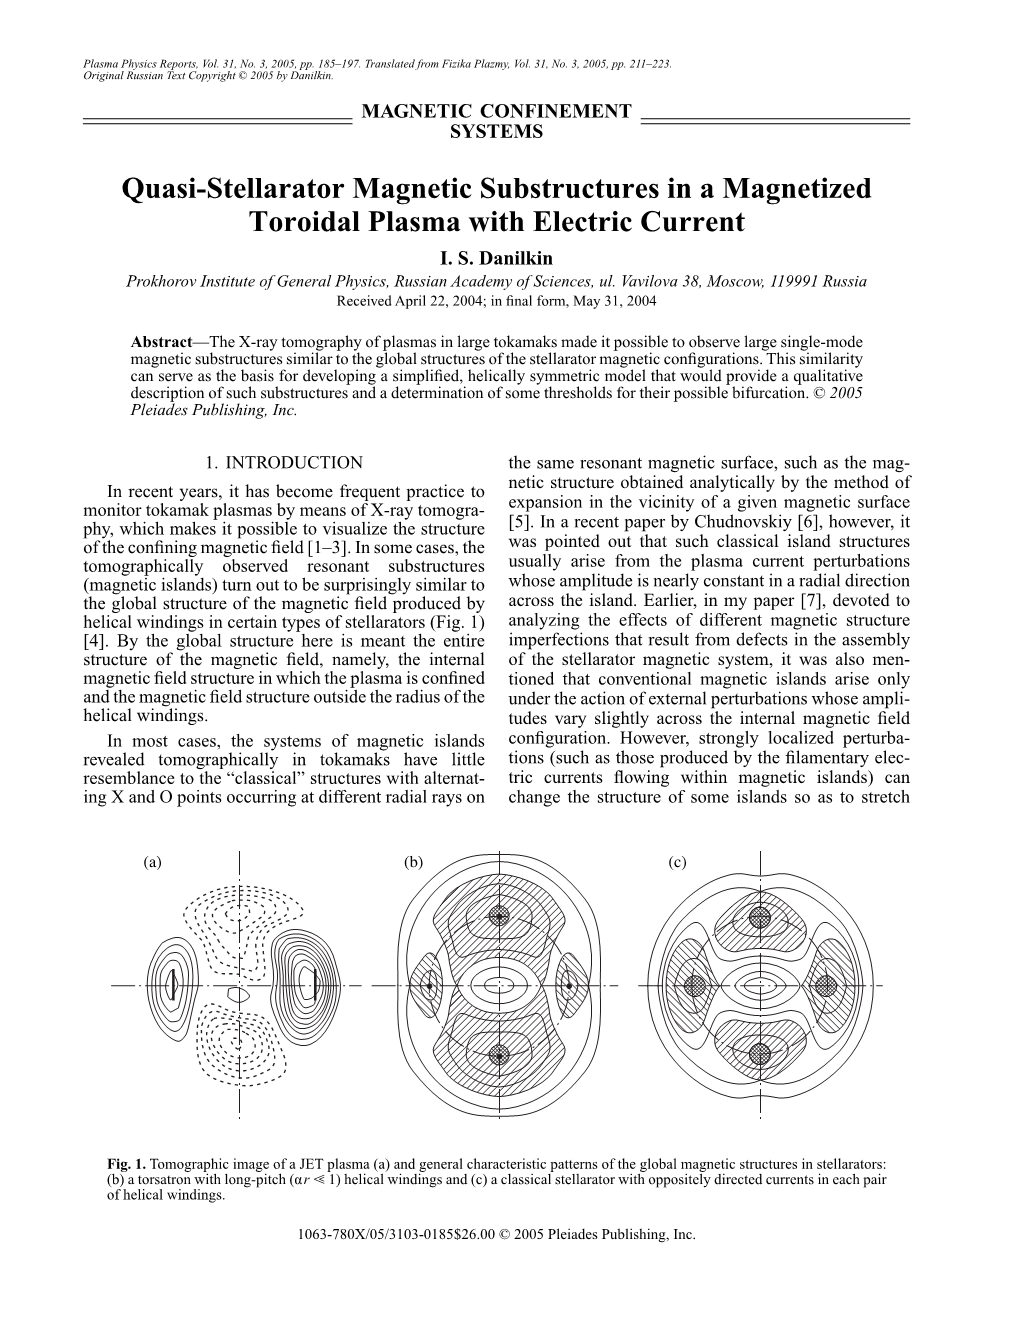 Quasi-Stellarator Magnetic Substructures in a Magnetized Toroidal Plasma with Electric Current I